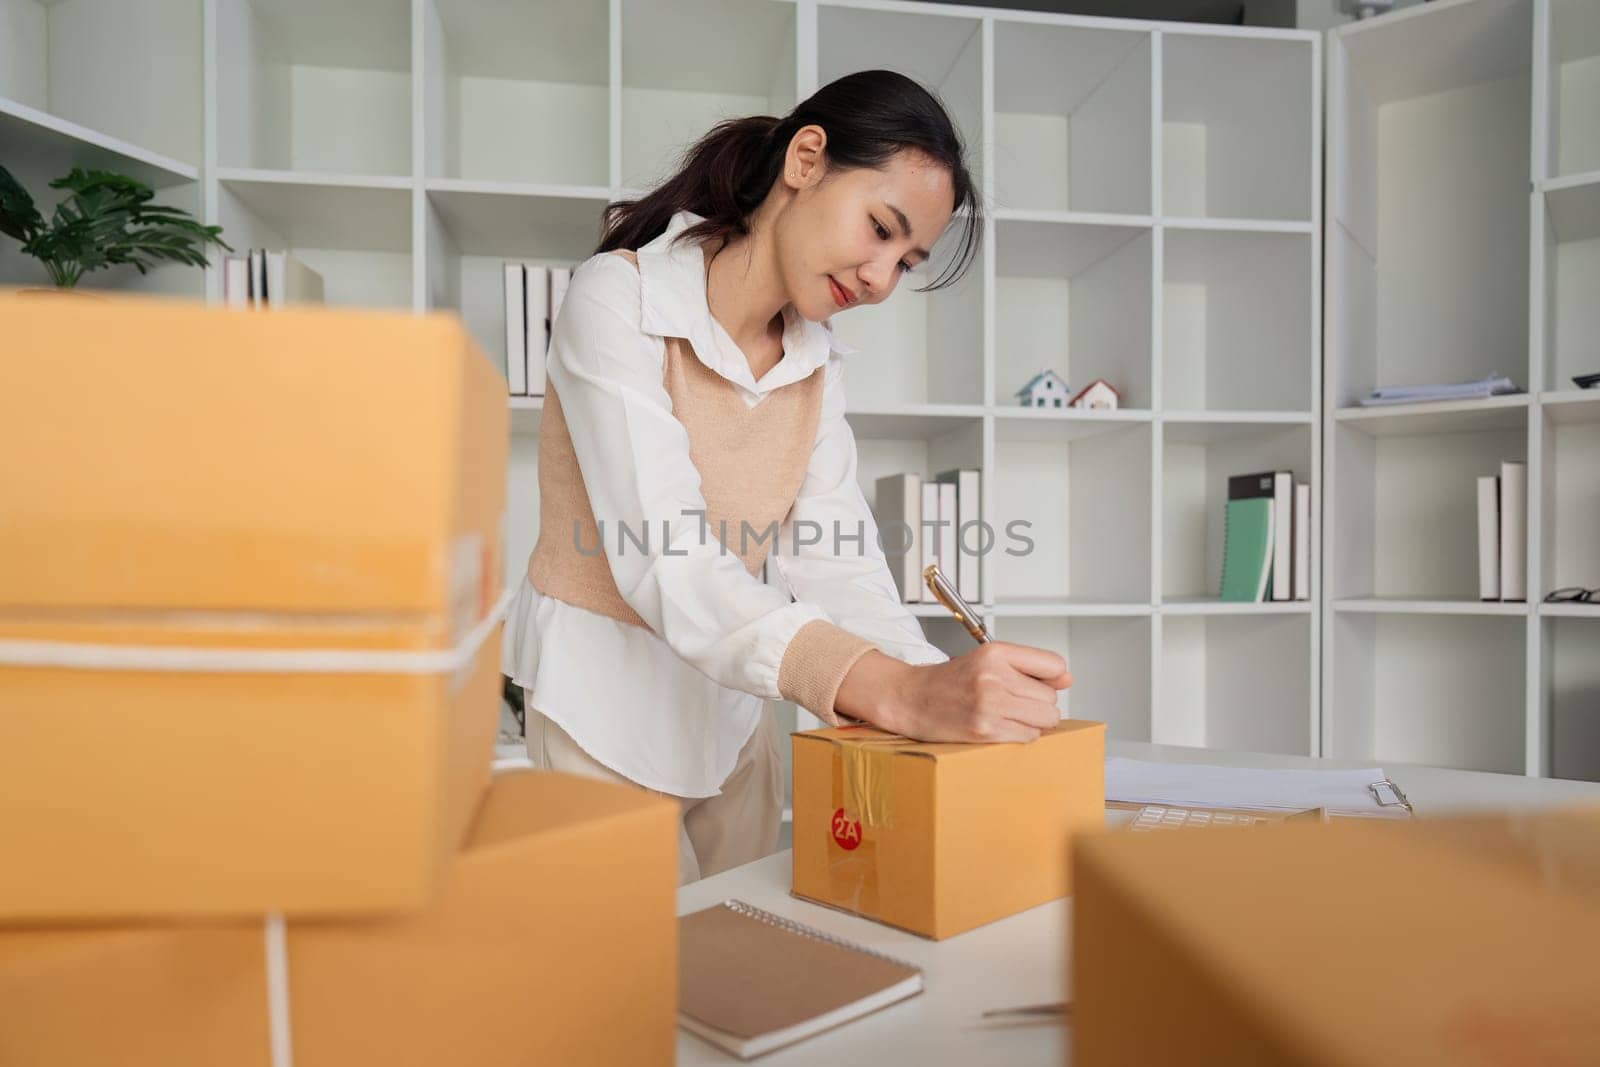 Young business woman entrepreneur online shipment business is preparing packages to send to customer. e-commerce concept by itchaznong